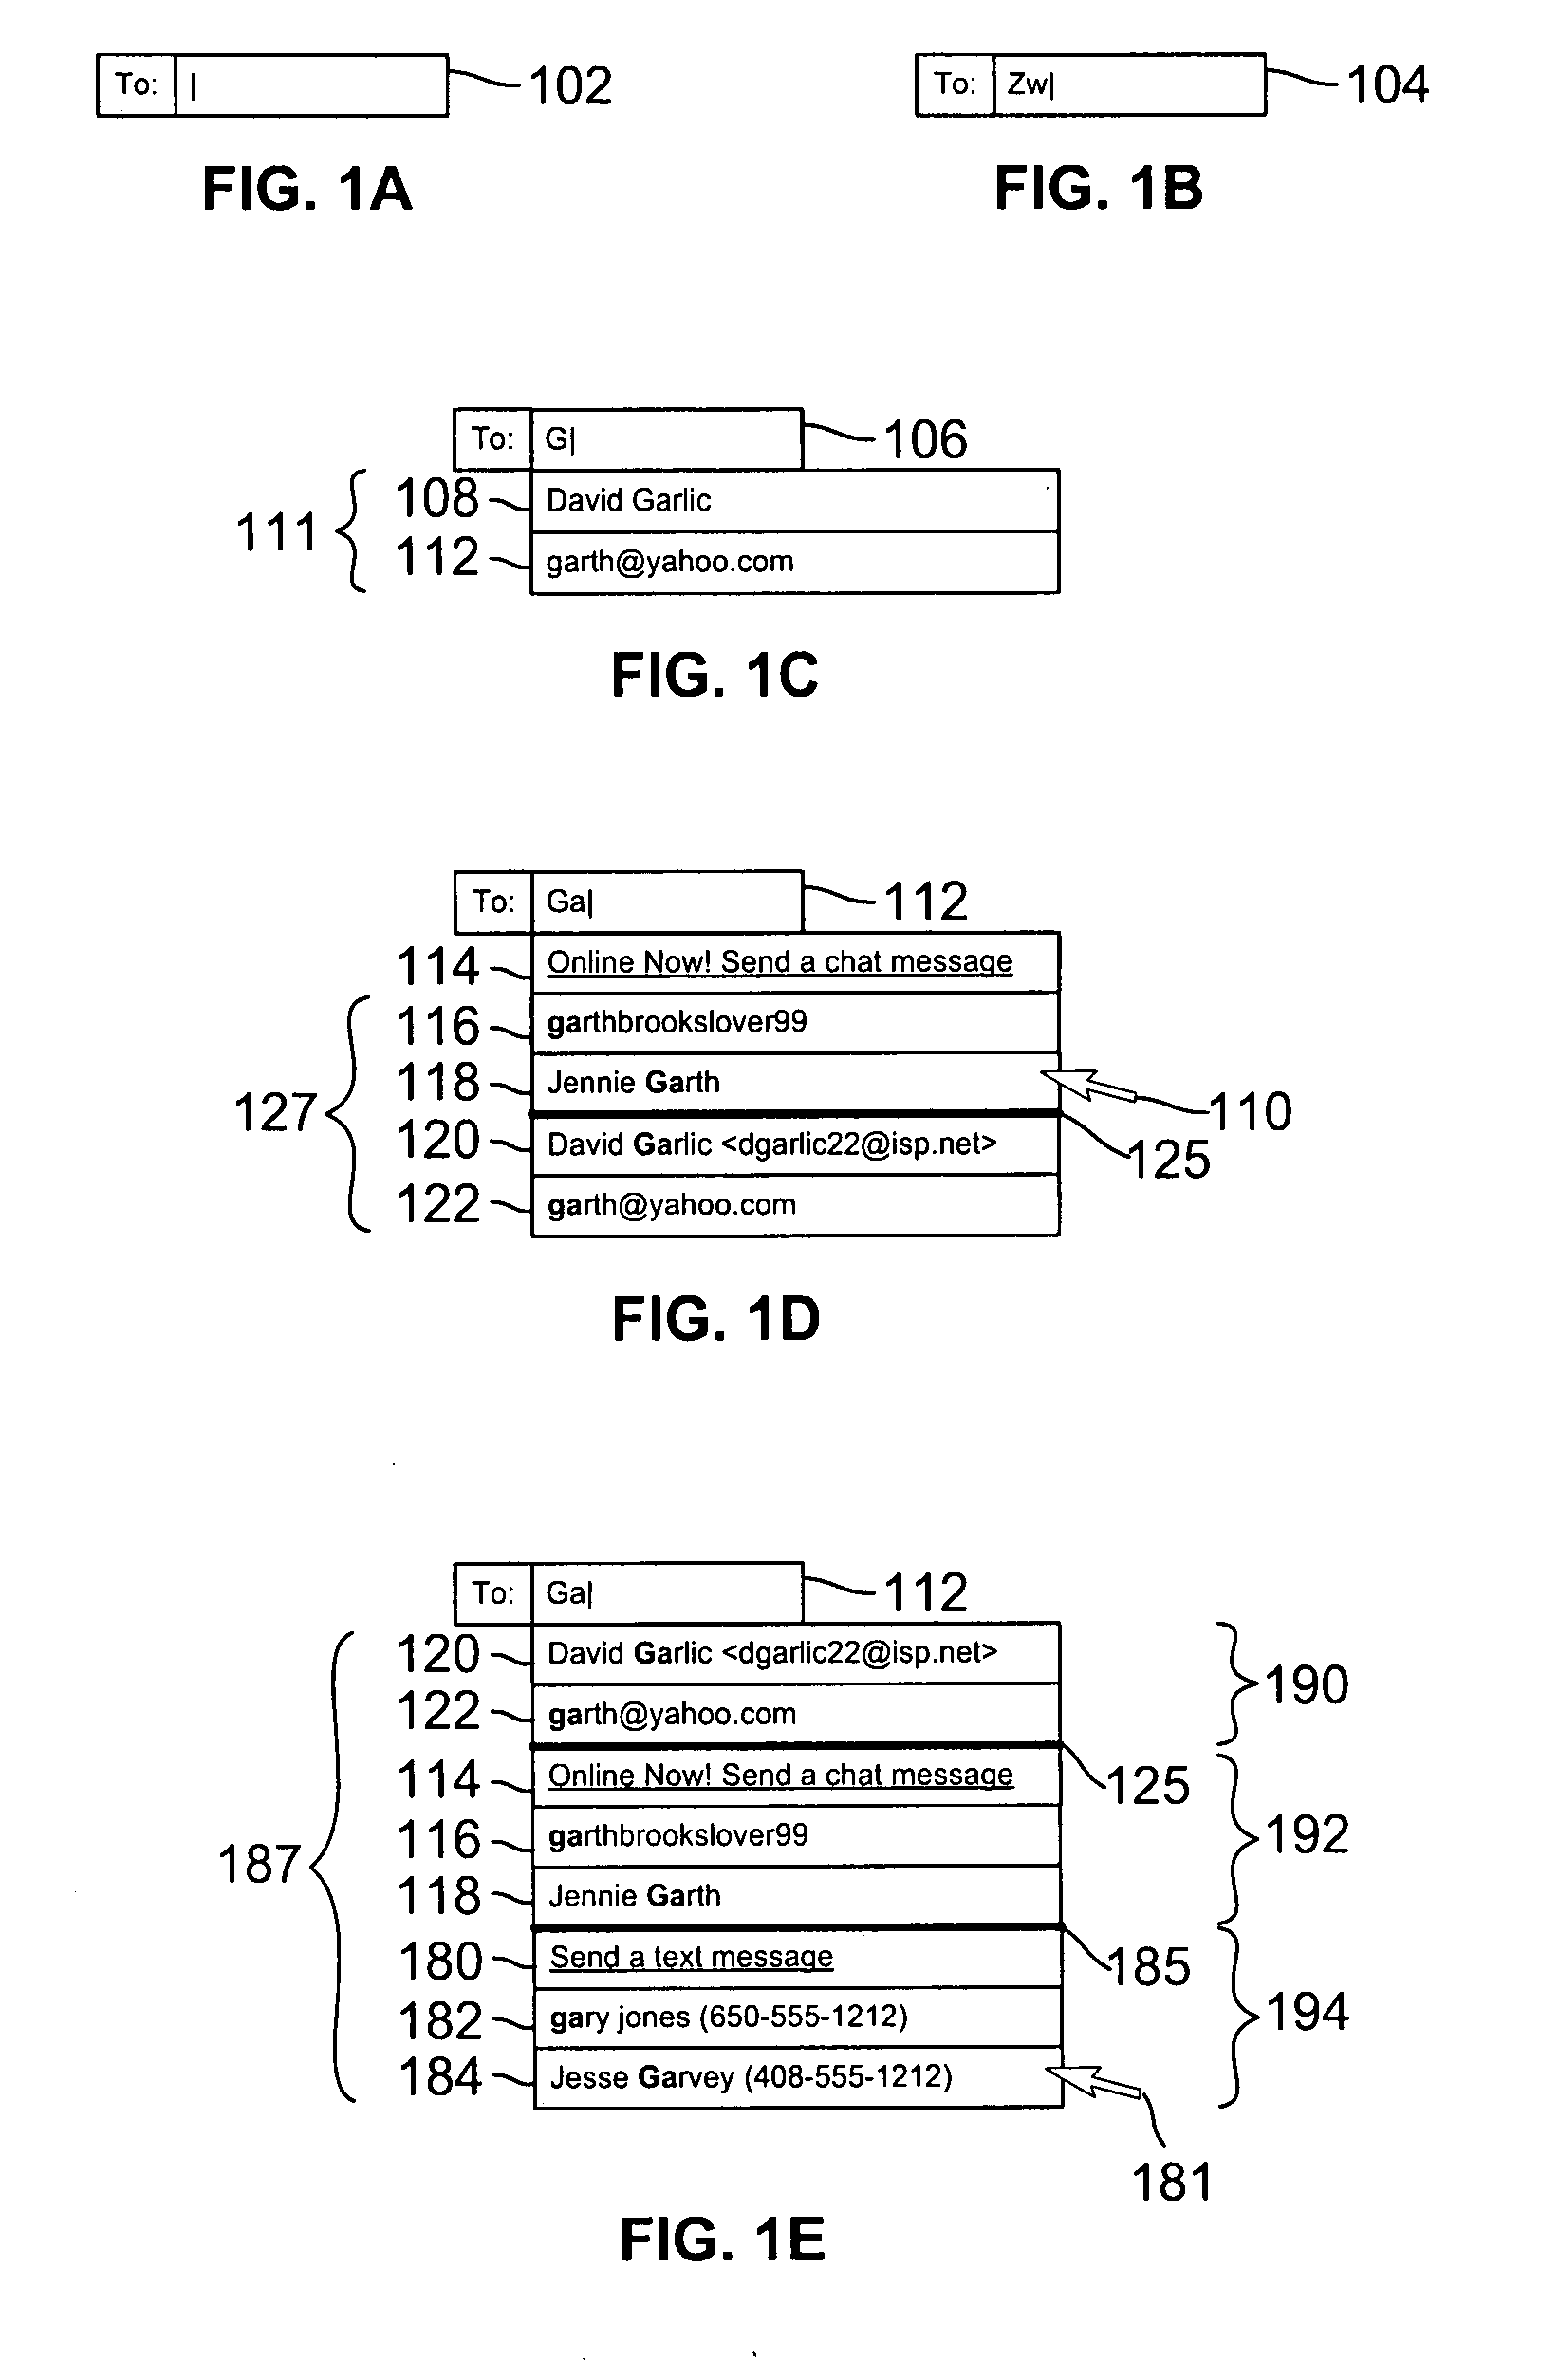 Autocomplete for intergrating diverse methods of electronic communication